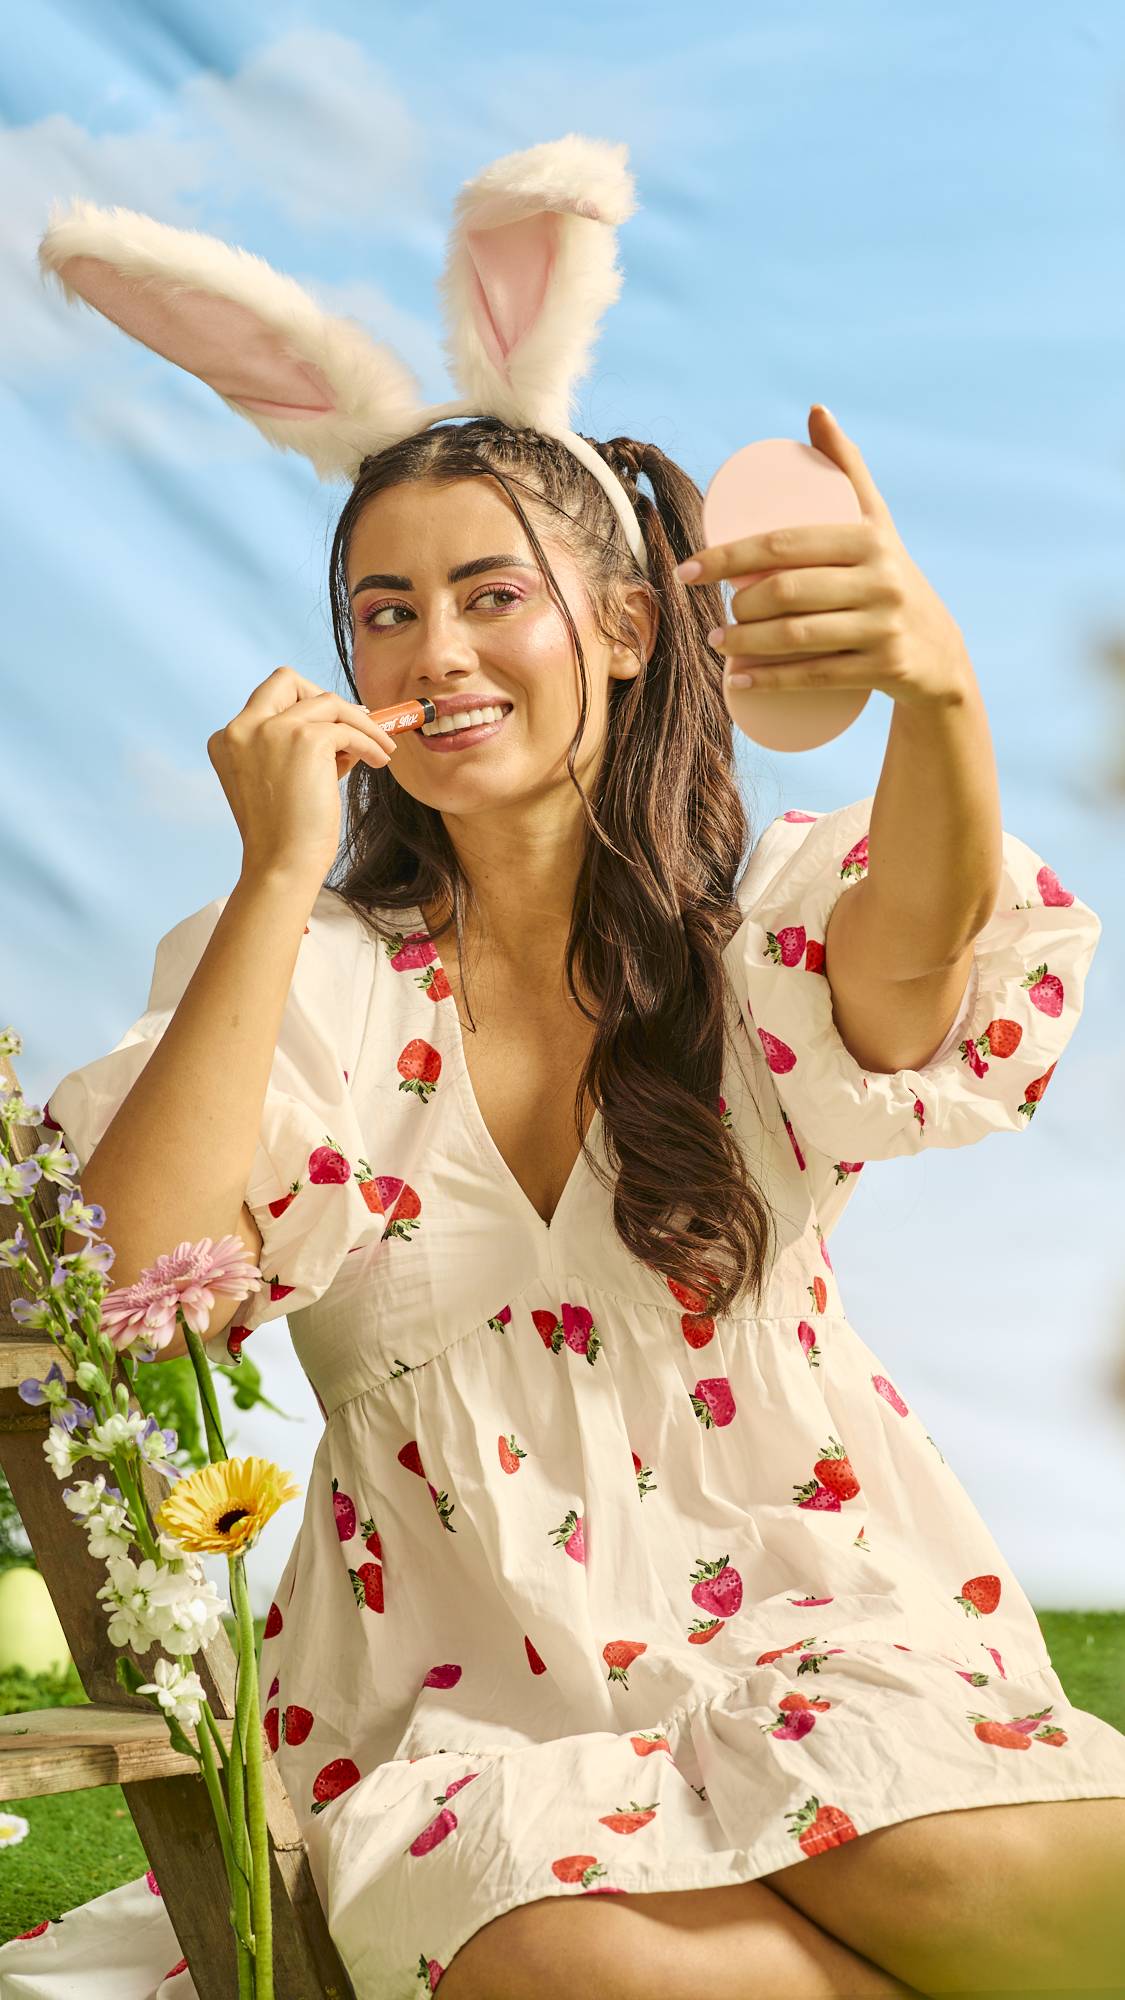 The model is sitting in a white dress with strawberry decoration and they are wearing a bunny ear headband as they apply the Carrot Stick holding a handheld mirror. 